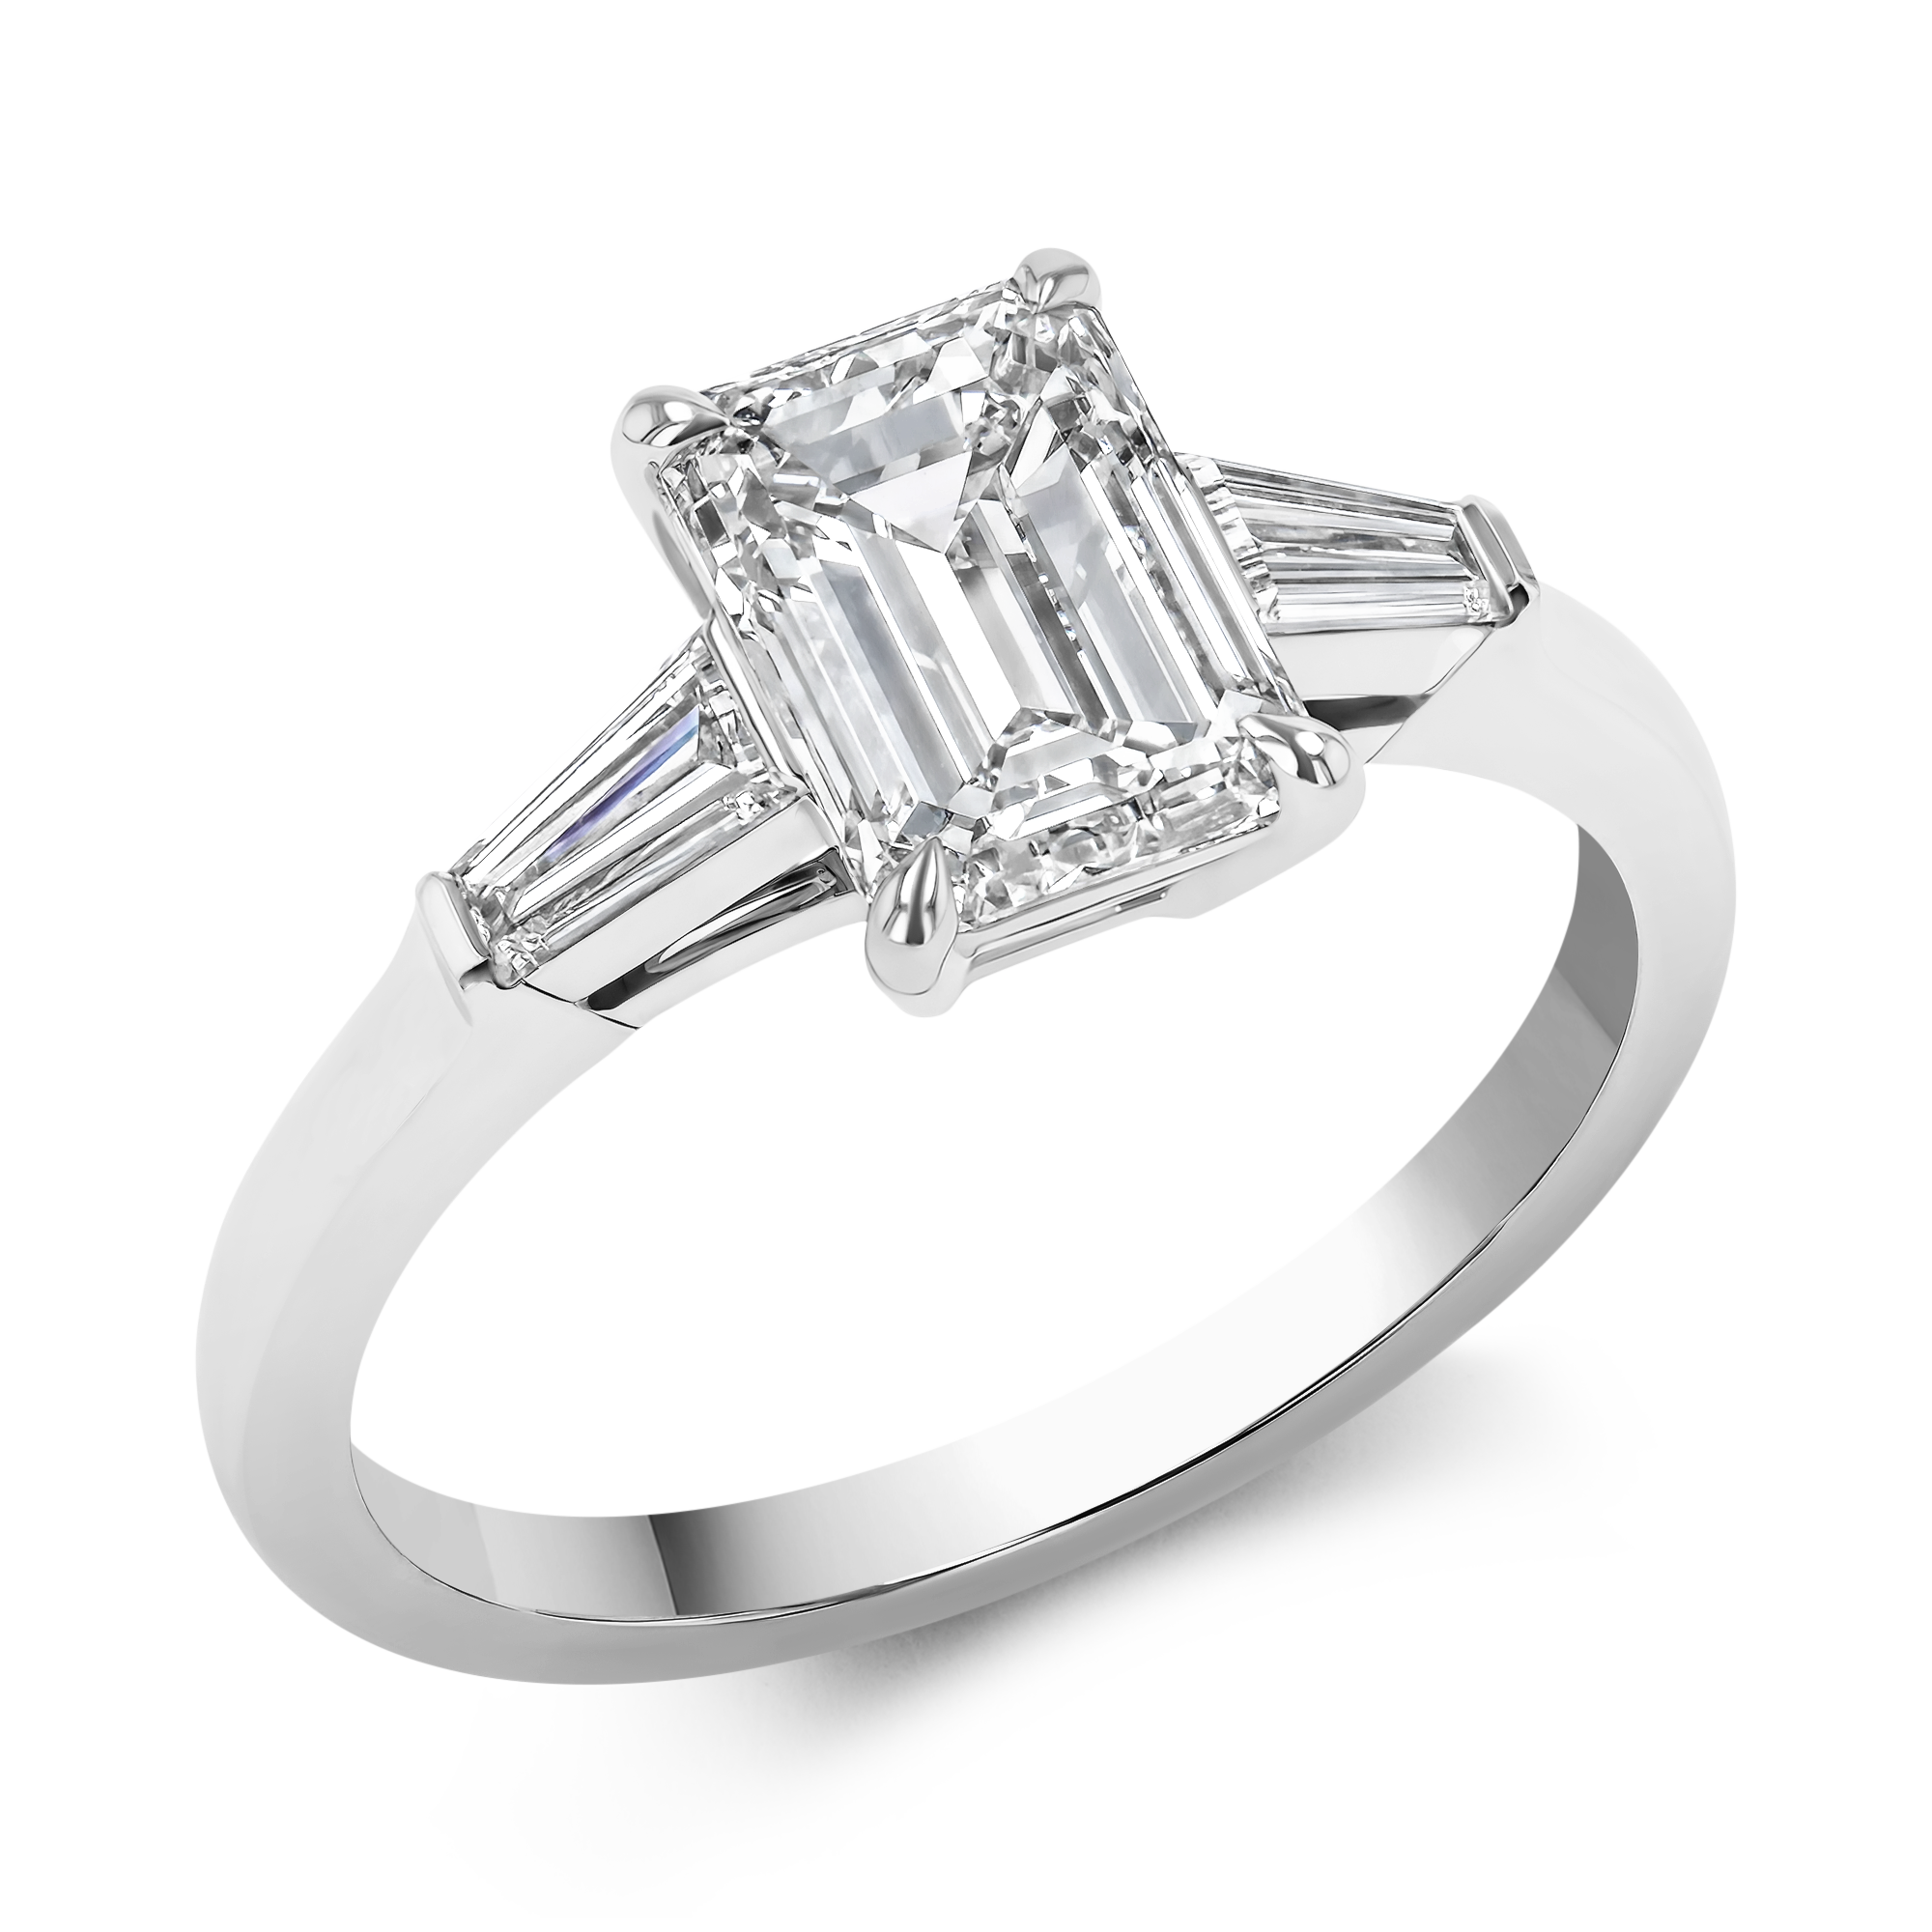 Regency 1.70ct Diamond Solitaire Ring Emerald Cut, Claw Set_1